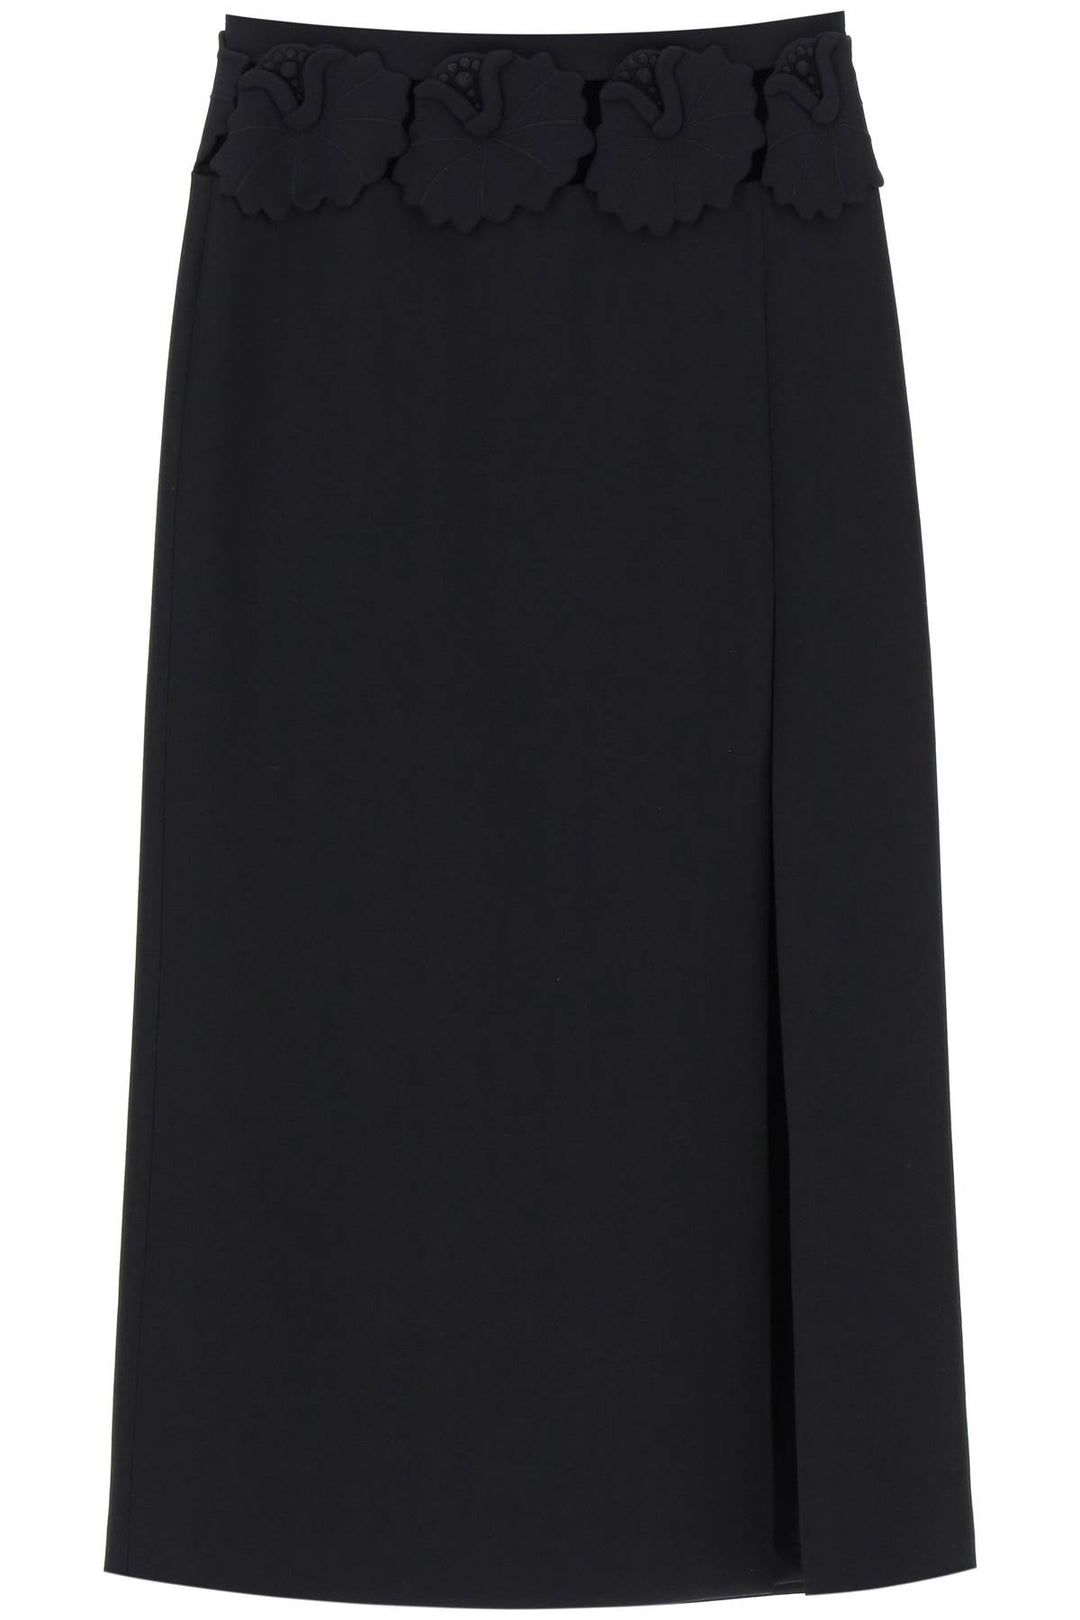 Valentino Garavani Replace With Double Quotemid Length Wool And Silk Skirt With Floral Appliqué   Black